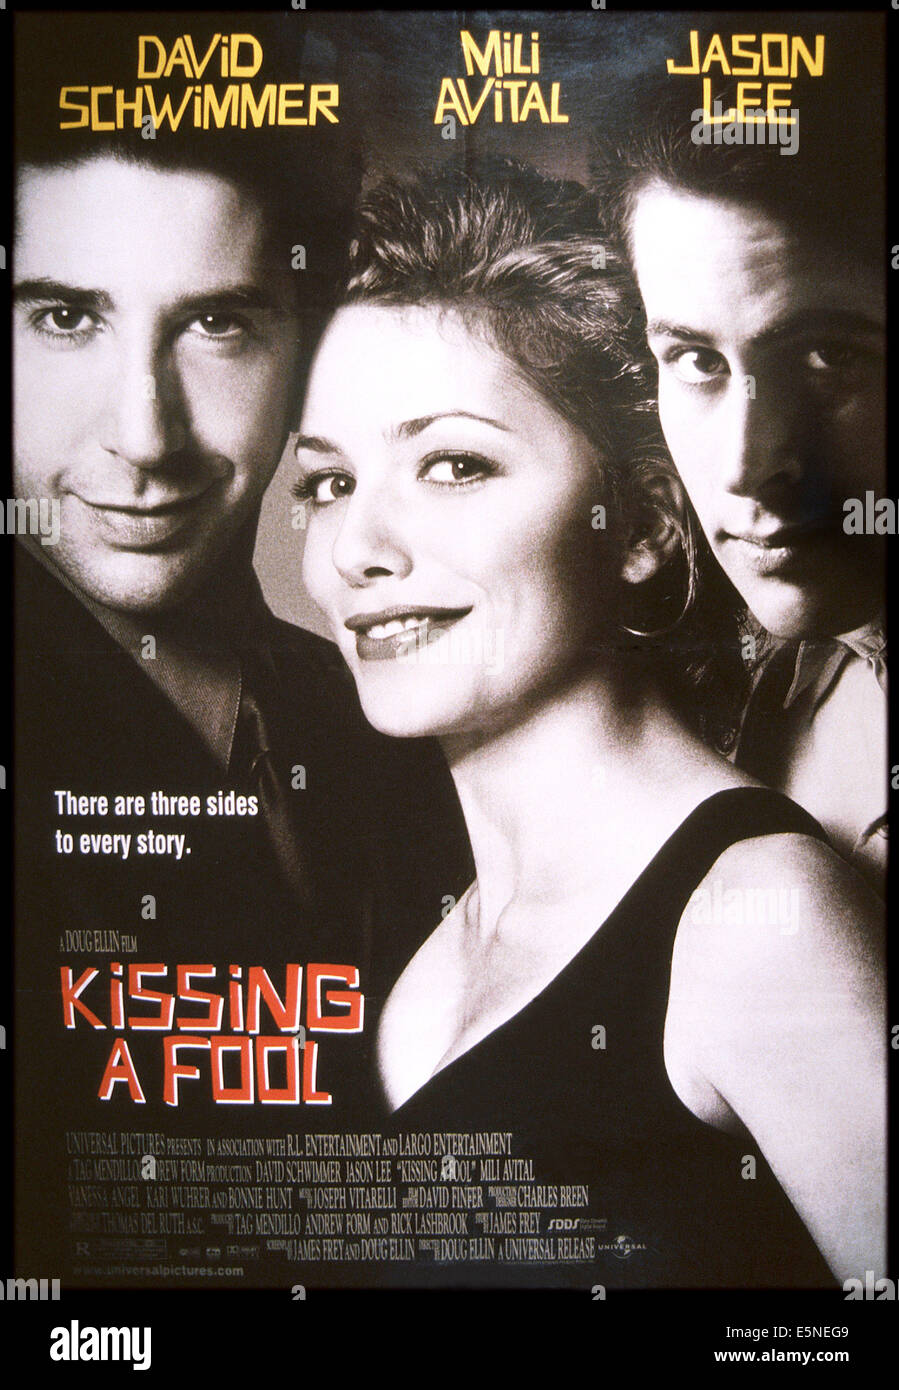 KISSING A FOOL, from left: David Schwimmer, Mili Avital, Jason Lee, 1998, © Universal/courtesy Everett Collection Stock Photo